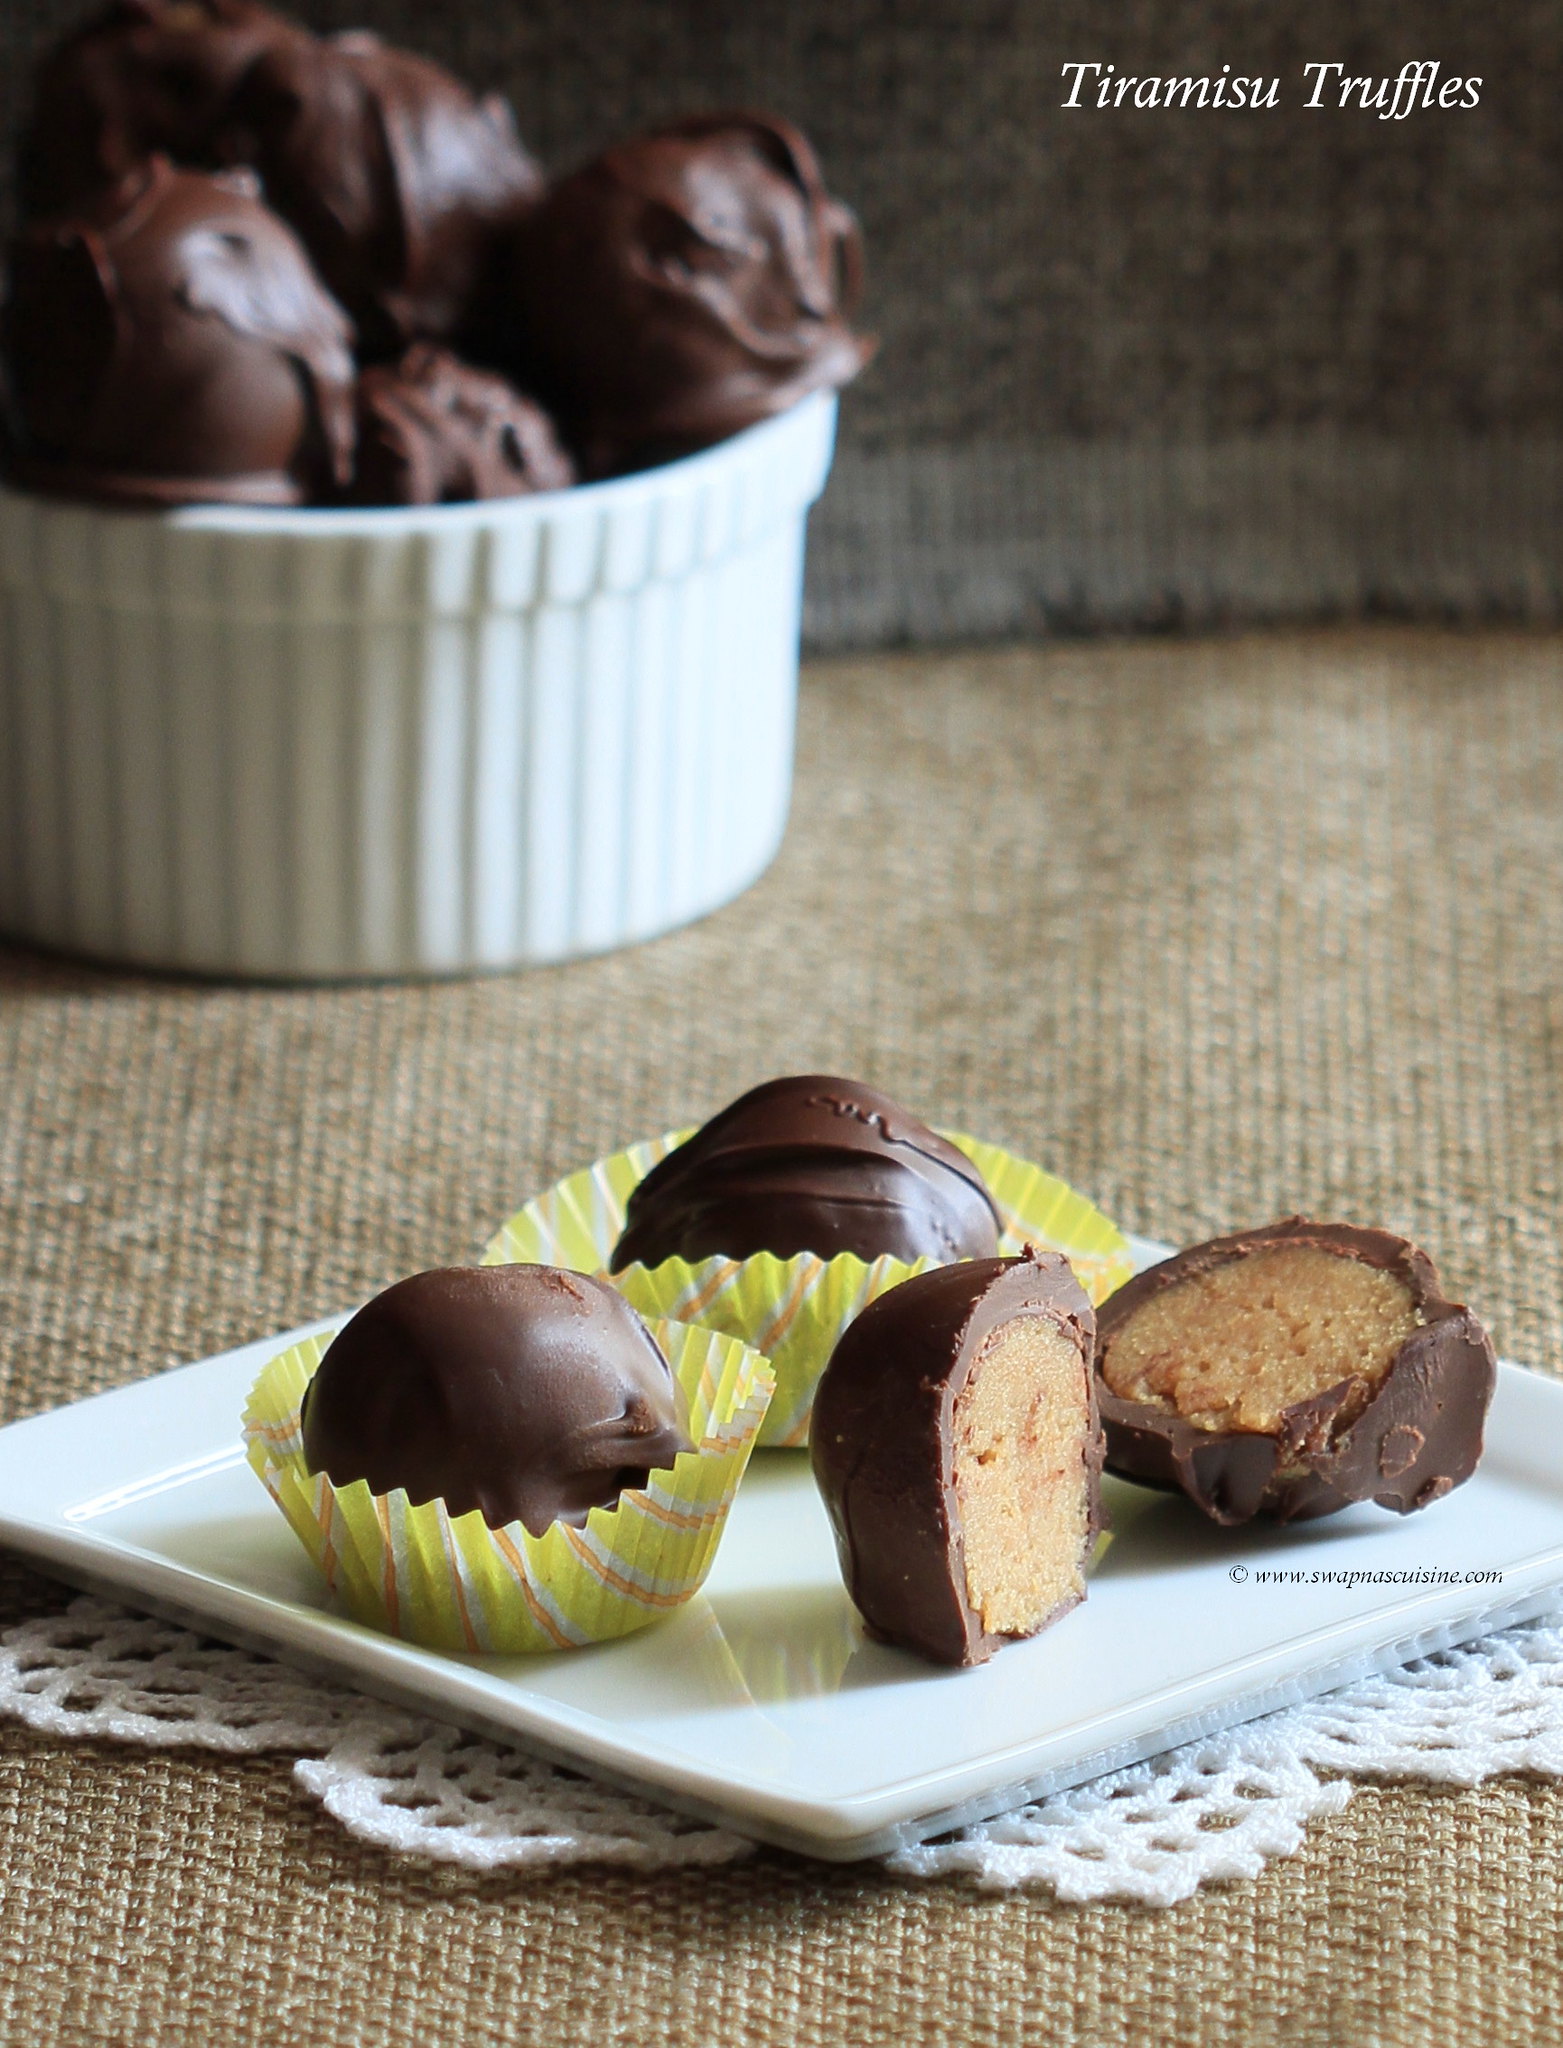 How to make truffles at home